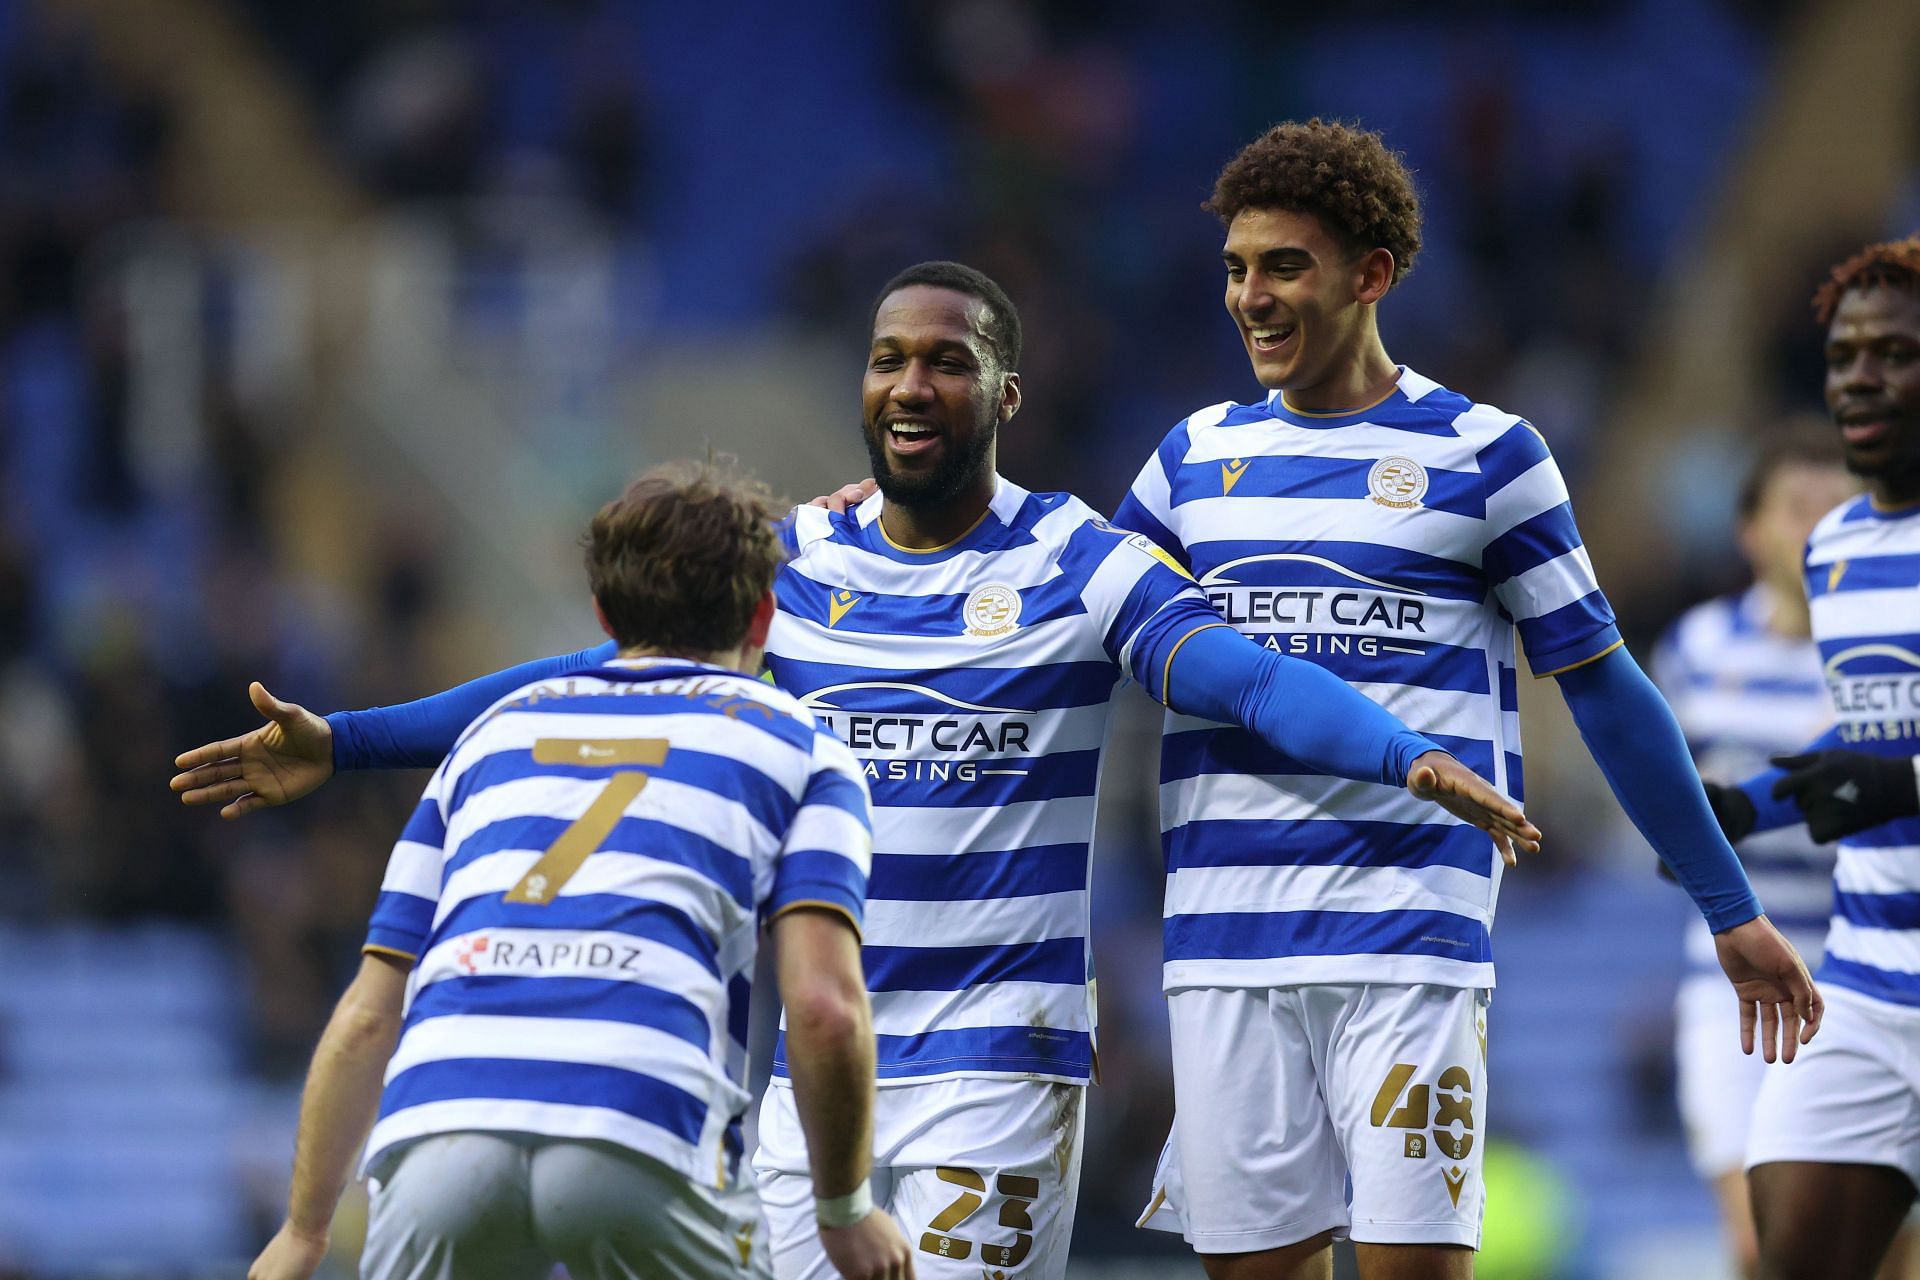 Reading are looking to climb up the table